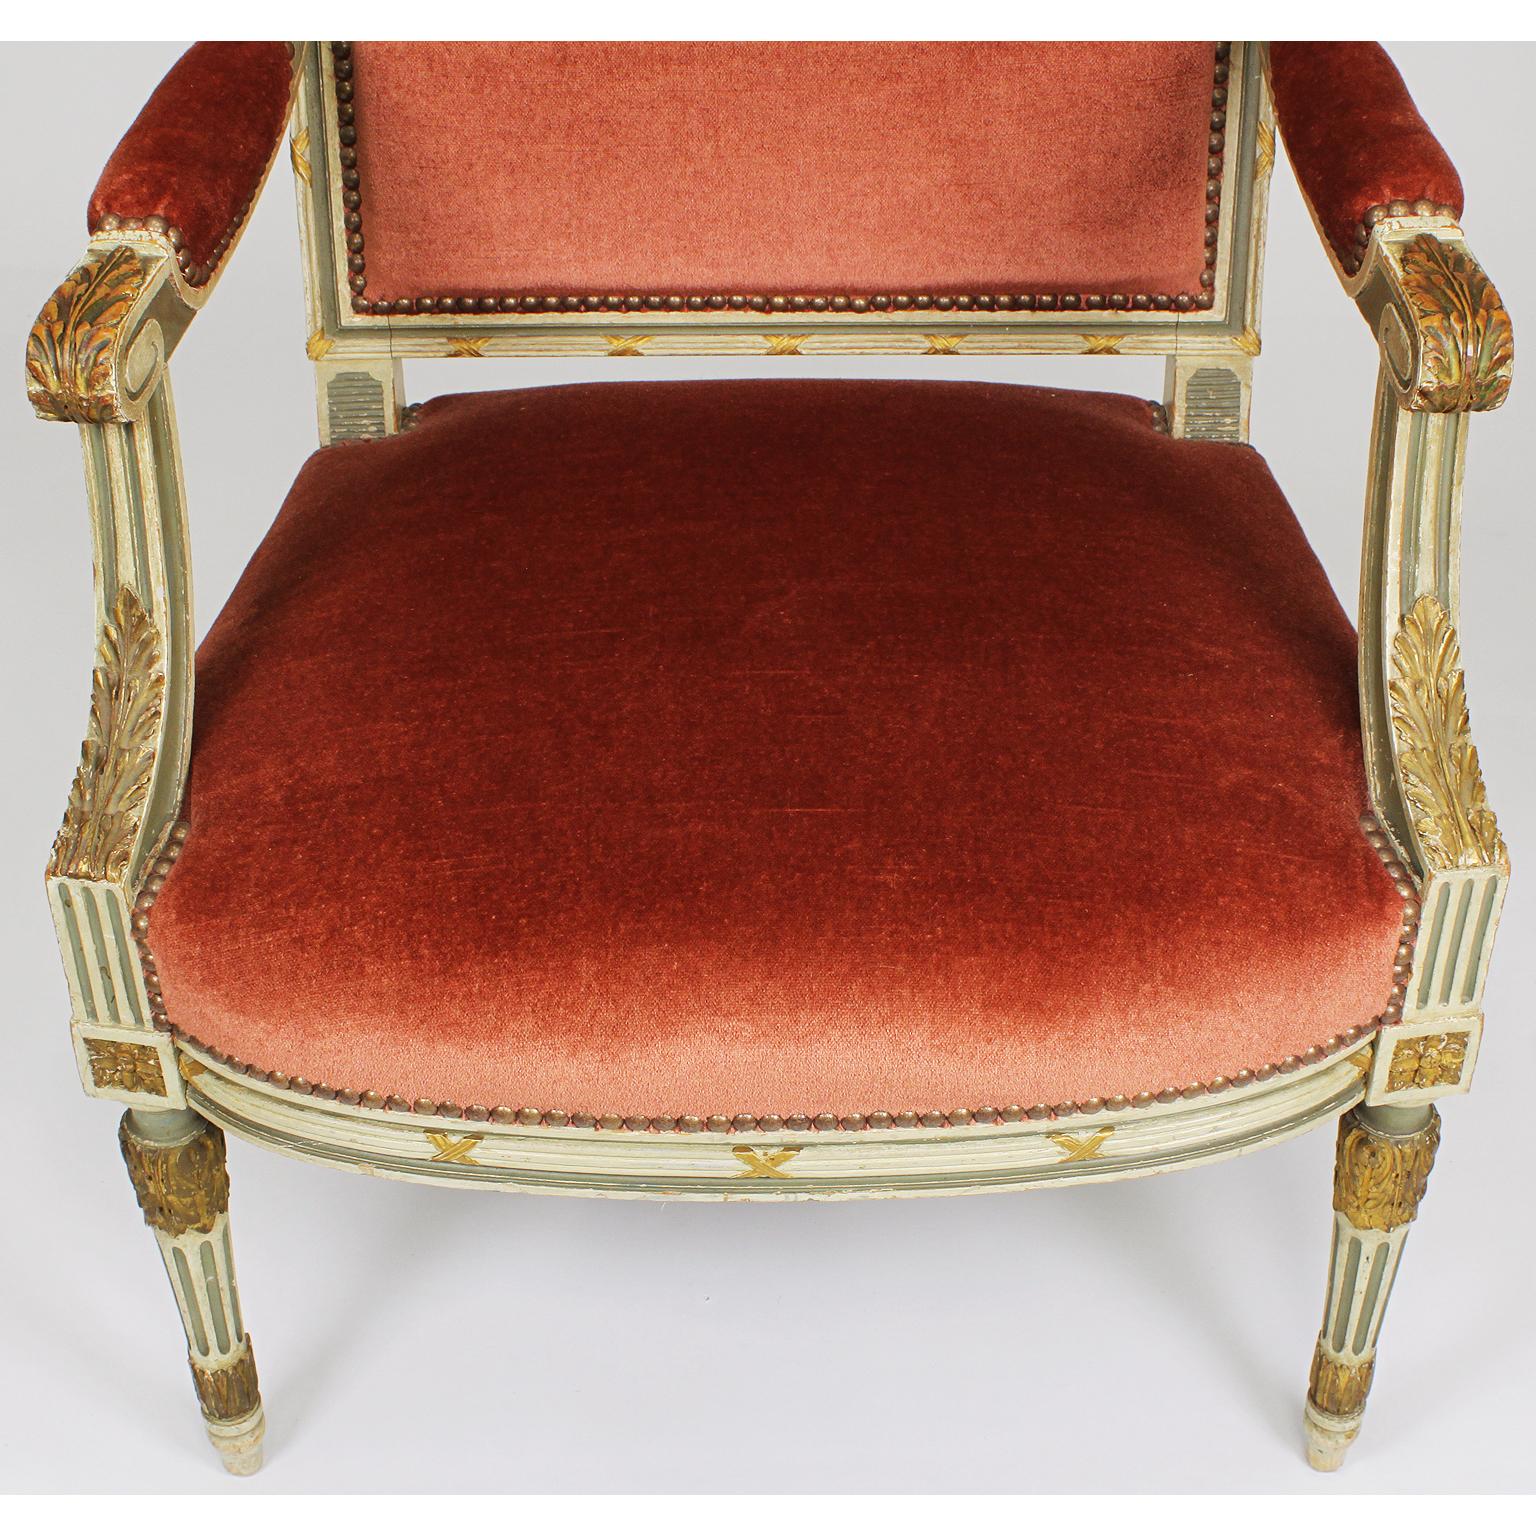 Early 20th Century Pair of French Louis XVI Style Gilt, Cream /Green Painted Fauteuils Armchairs For Sale